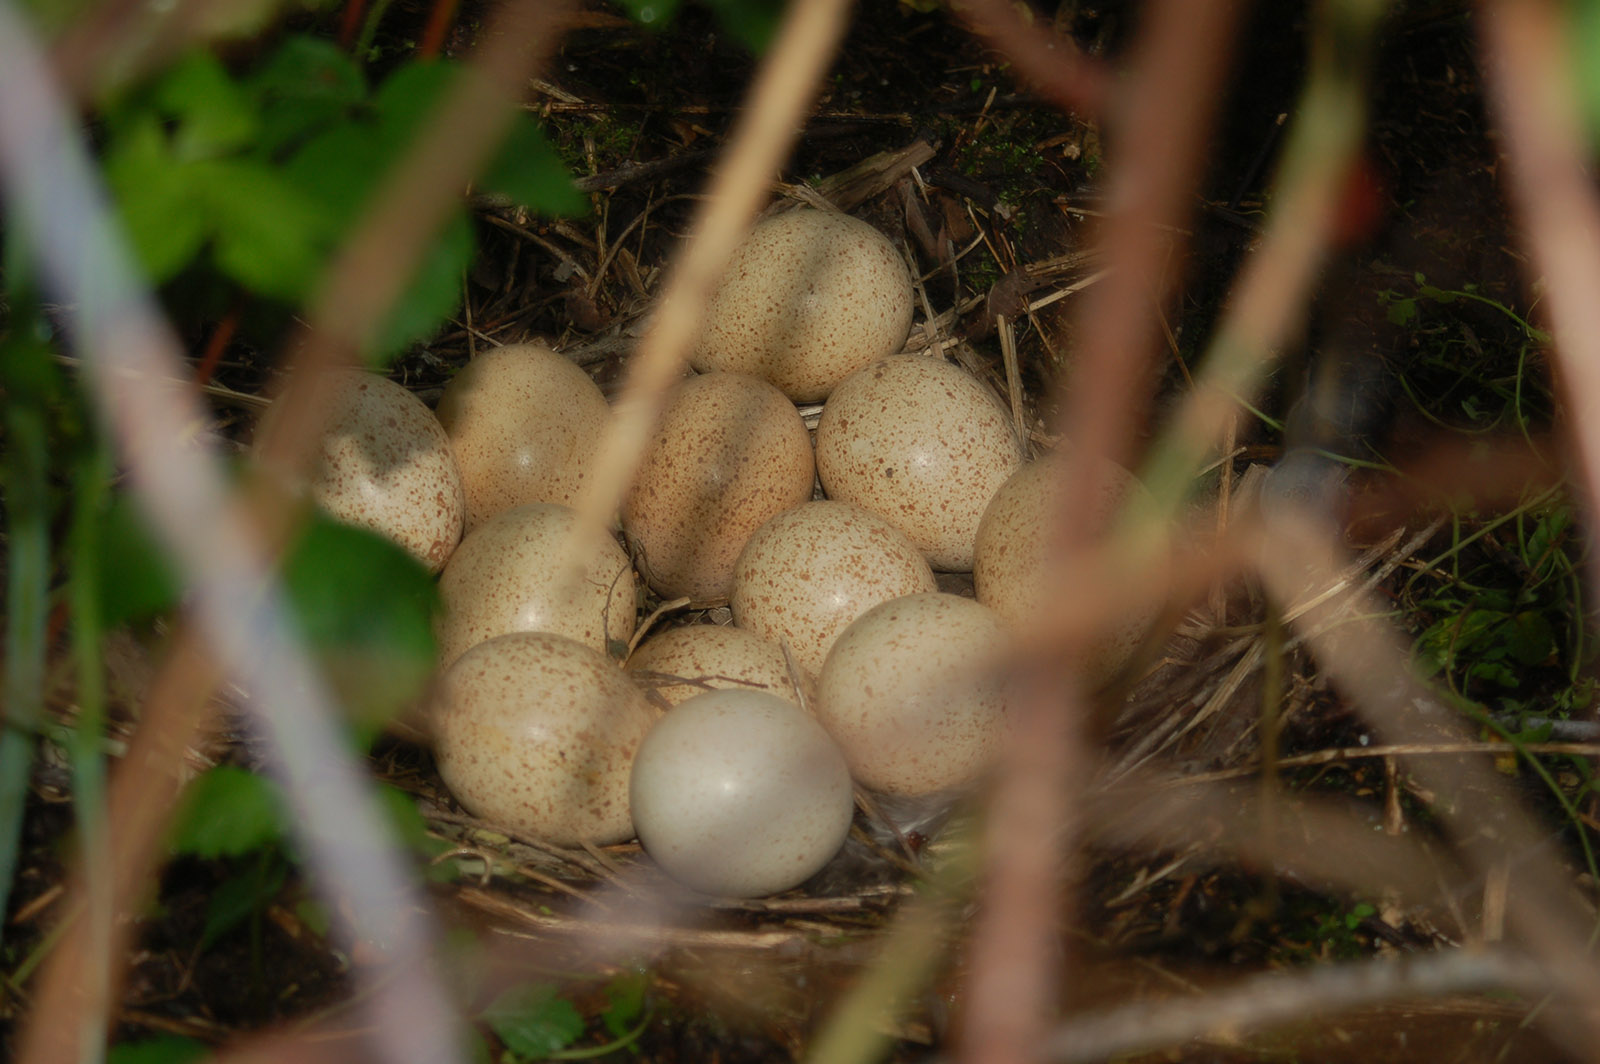 A close-up photo of 12 large eggs in a nest amongst tall grass.